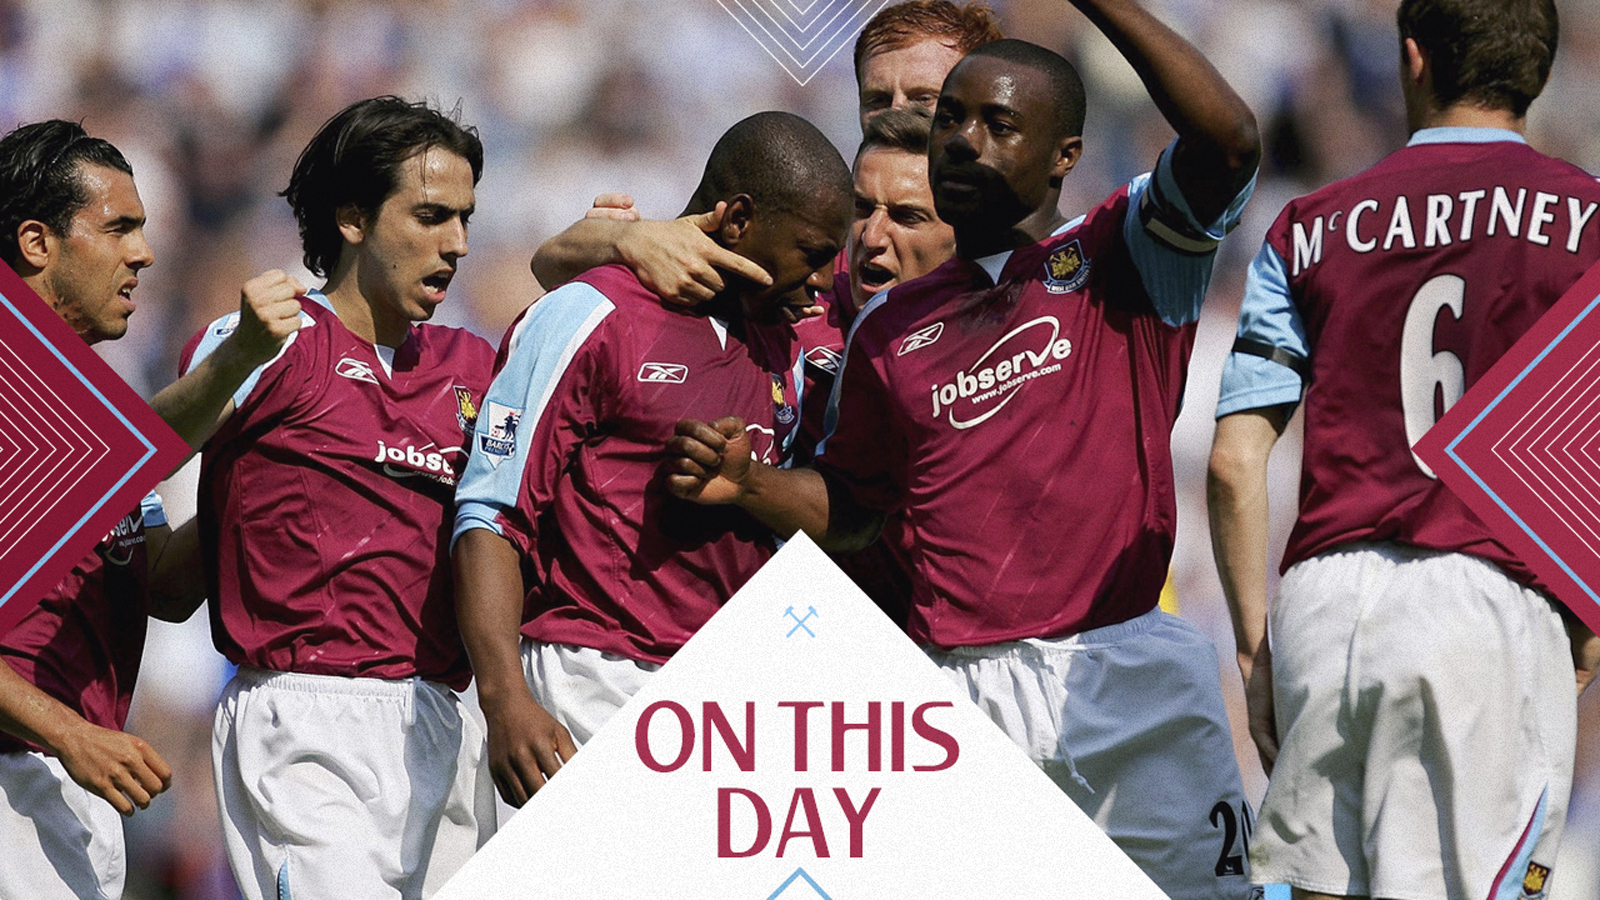 West Ham players celebrate a goal at Wigan in 2007